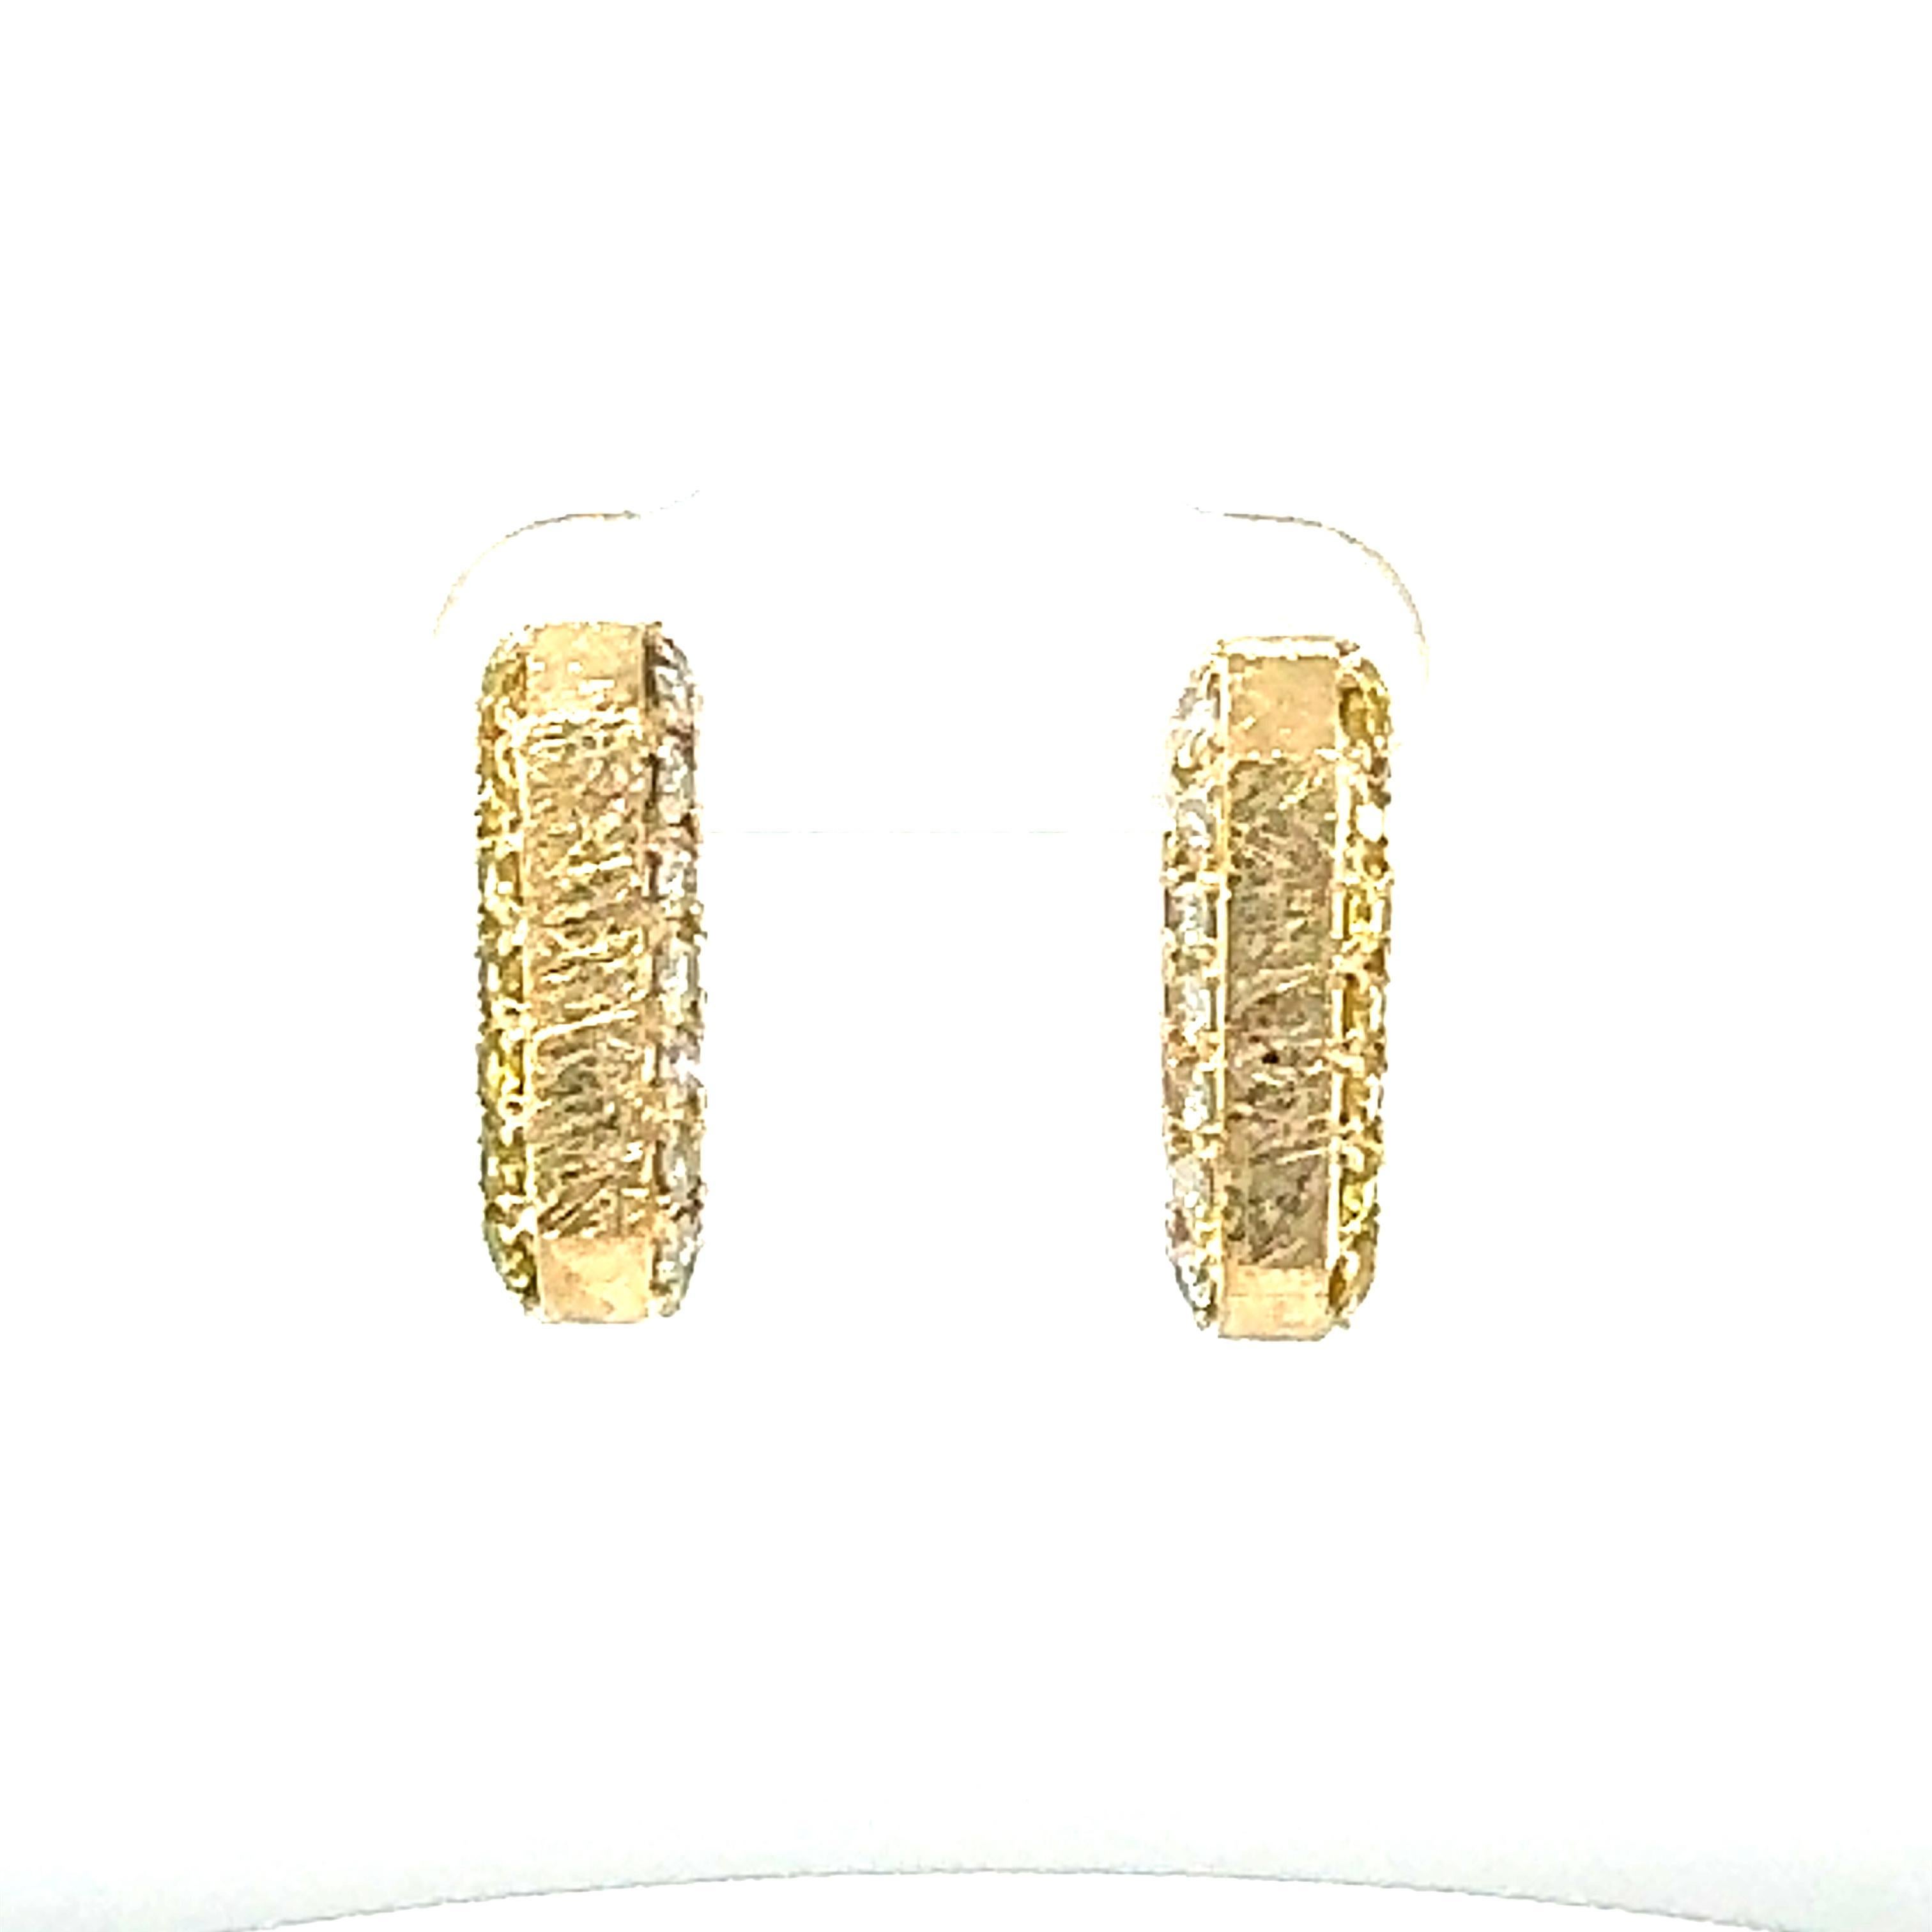 Contemporary 1.16 Carat Diamond Yellow Sapphire Gold Hoop Earrings For Sale